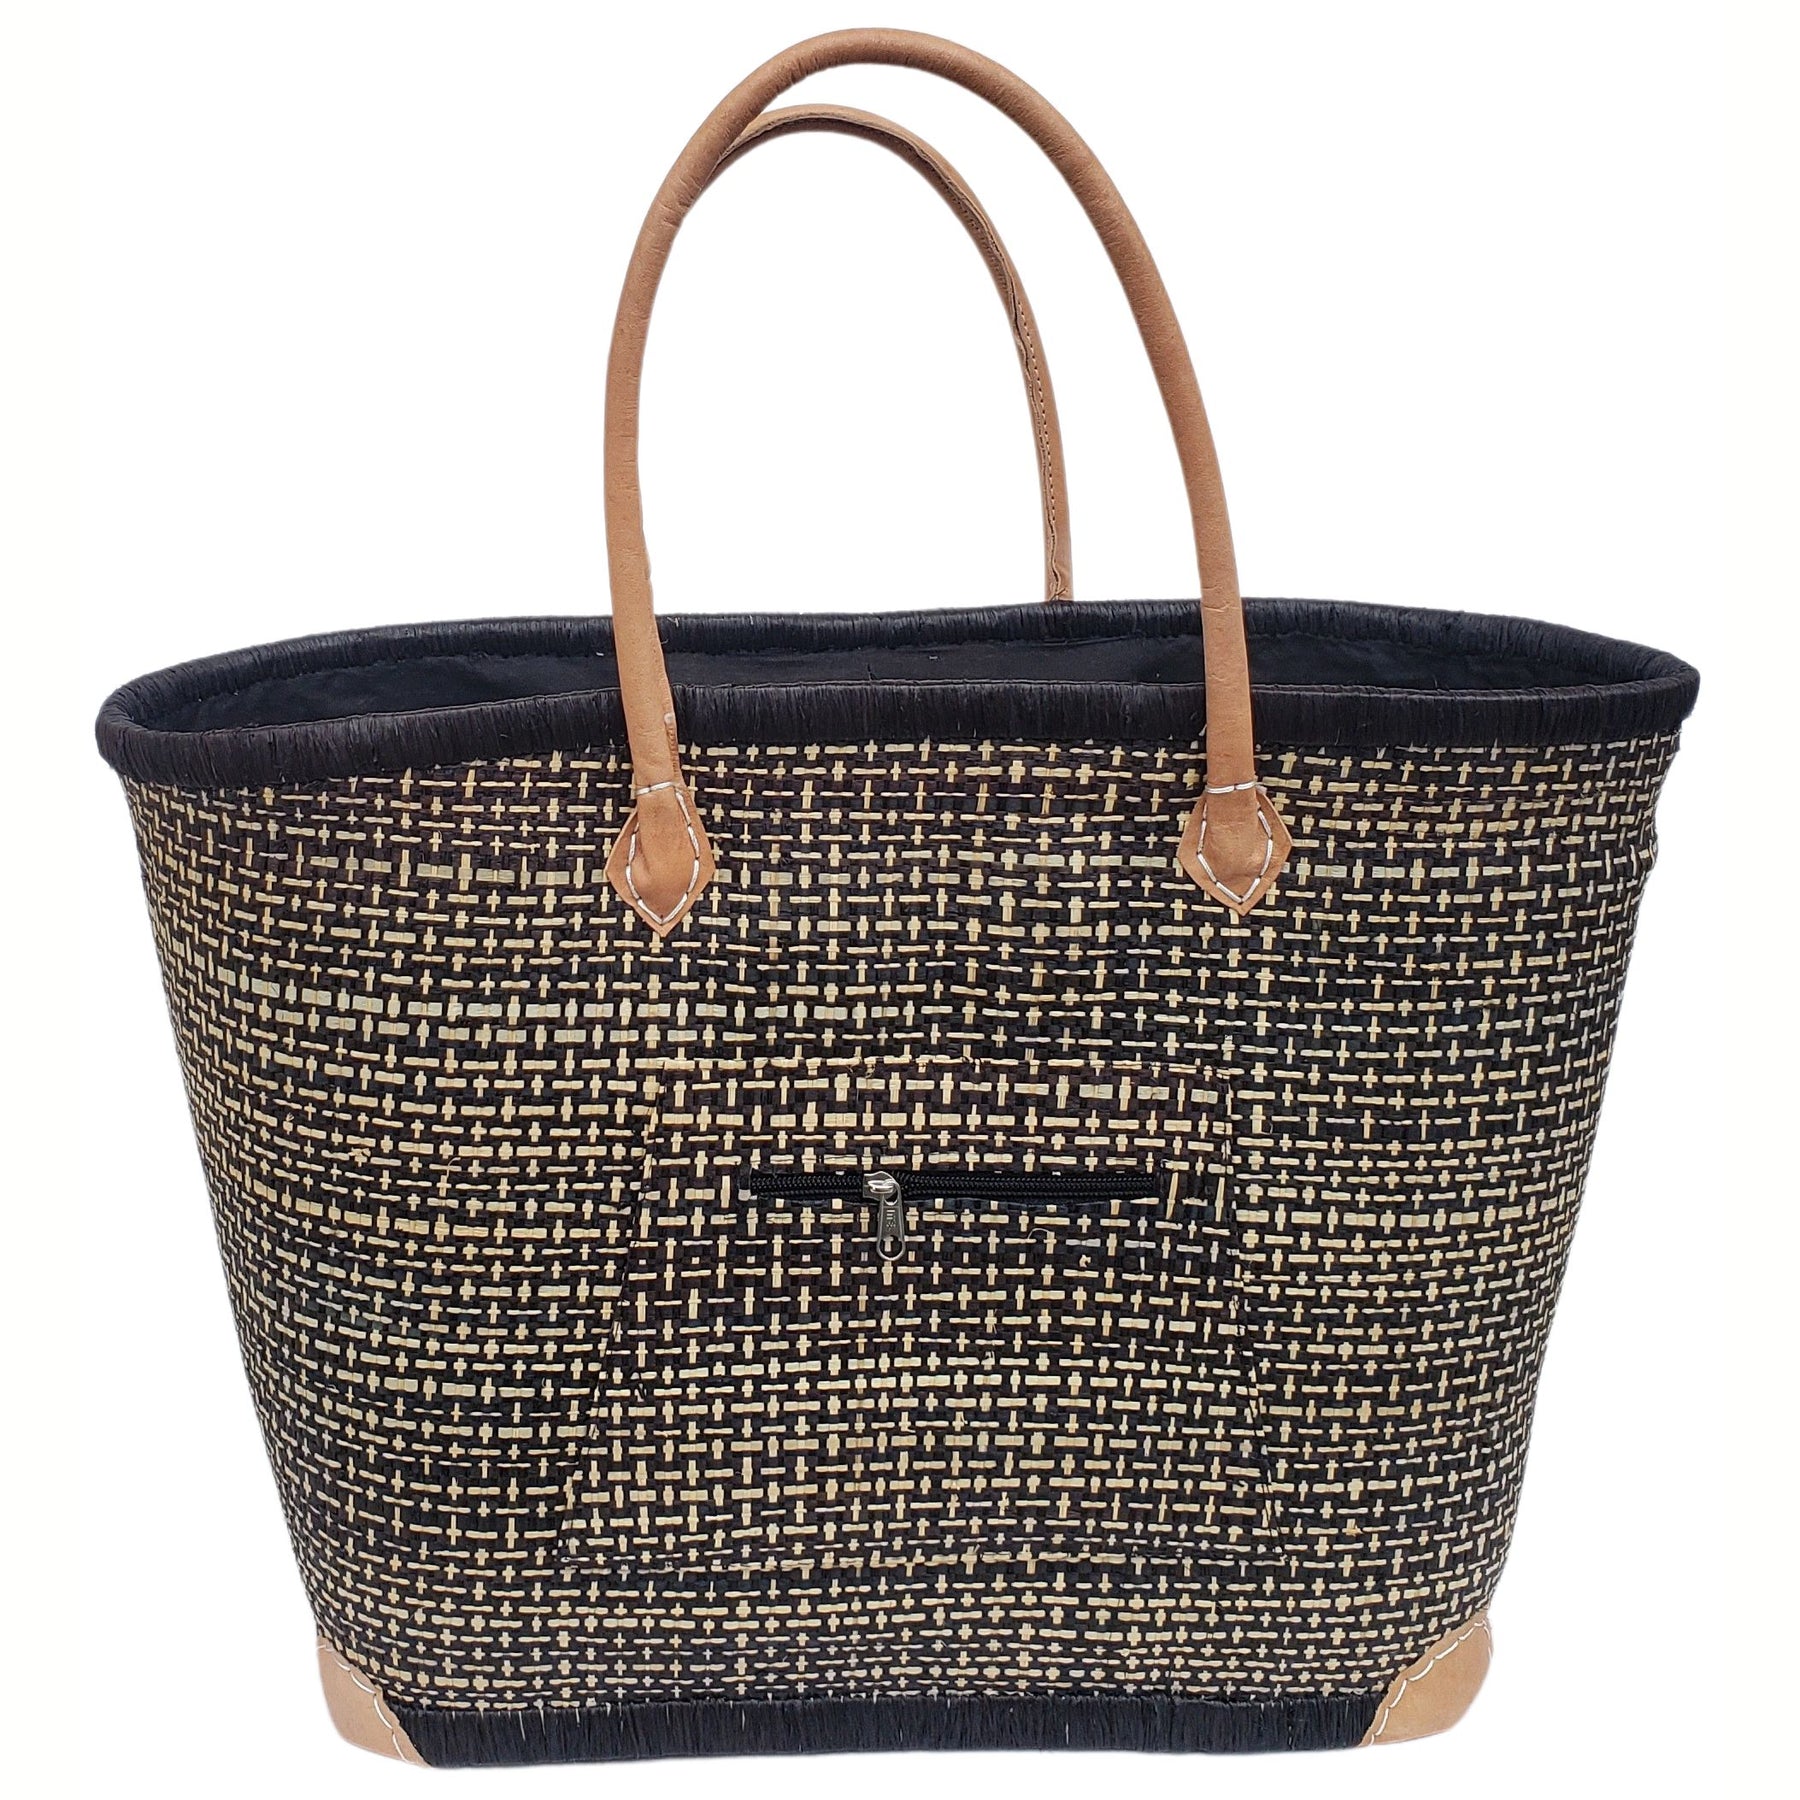 23 of 59: Adjanie: Authentic Madagascar Raffia and Leather Tote Bag (Black and Natural)